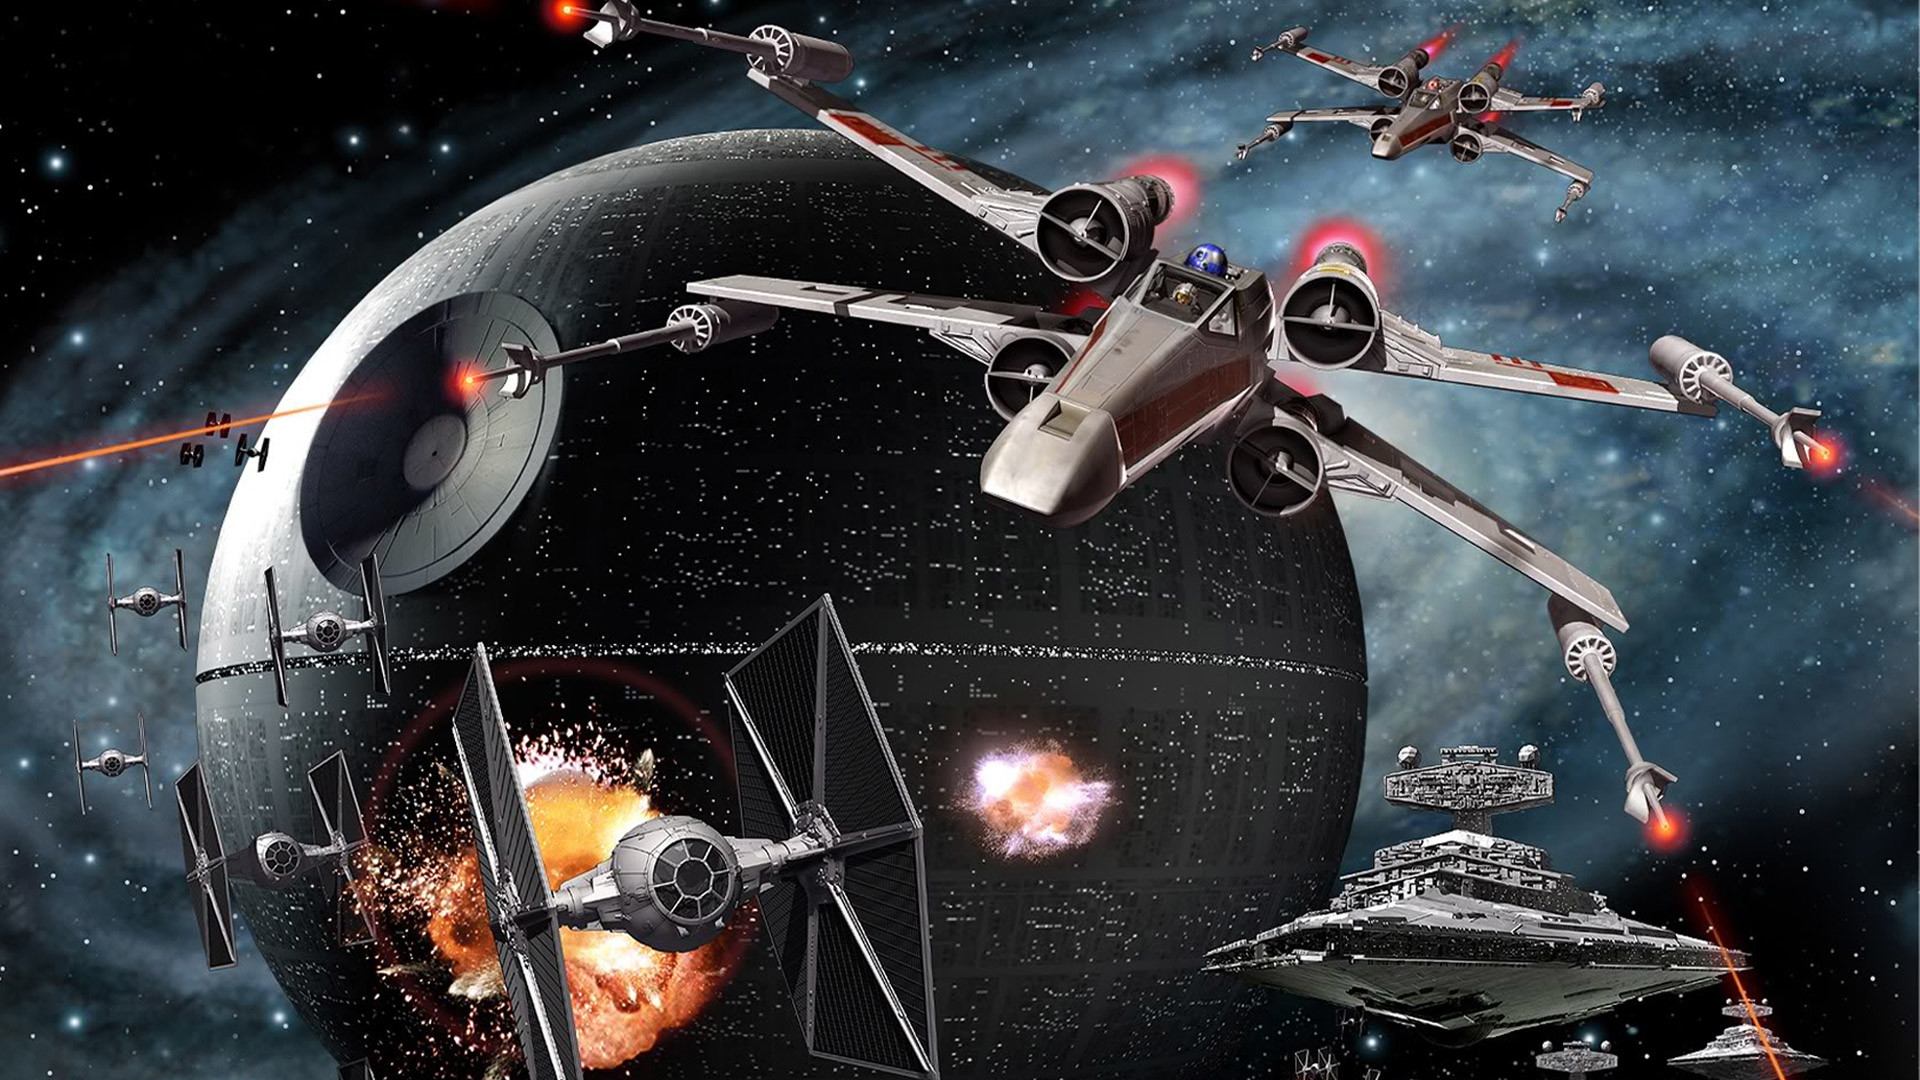 A nice piece of CG artwork showing the battle between the rebel alliance and the empire over the death star. Looks very detailed as your wallpaper